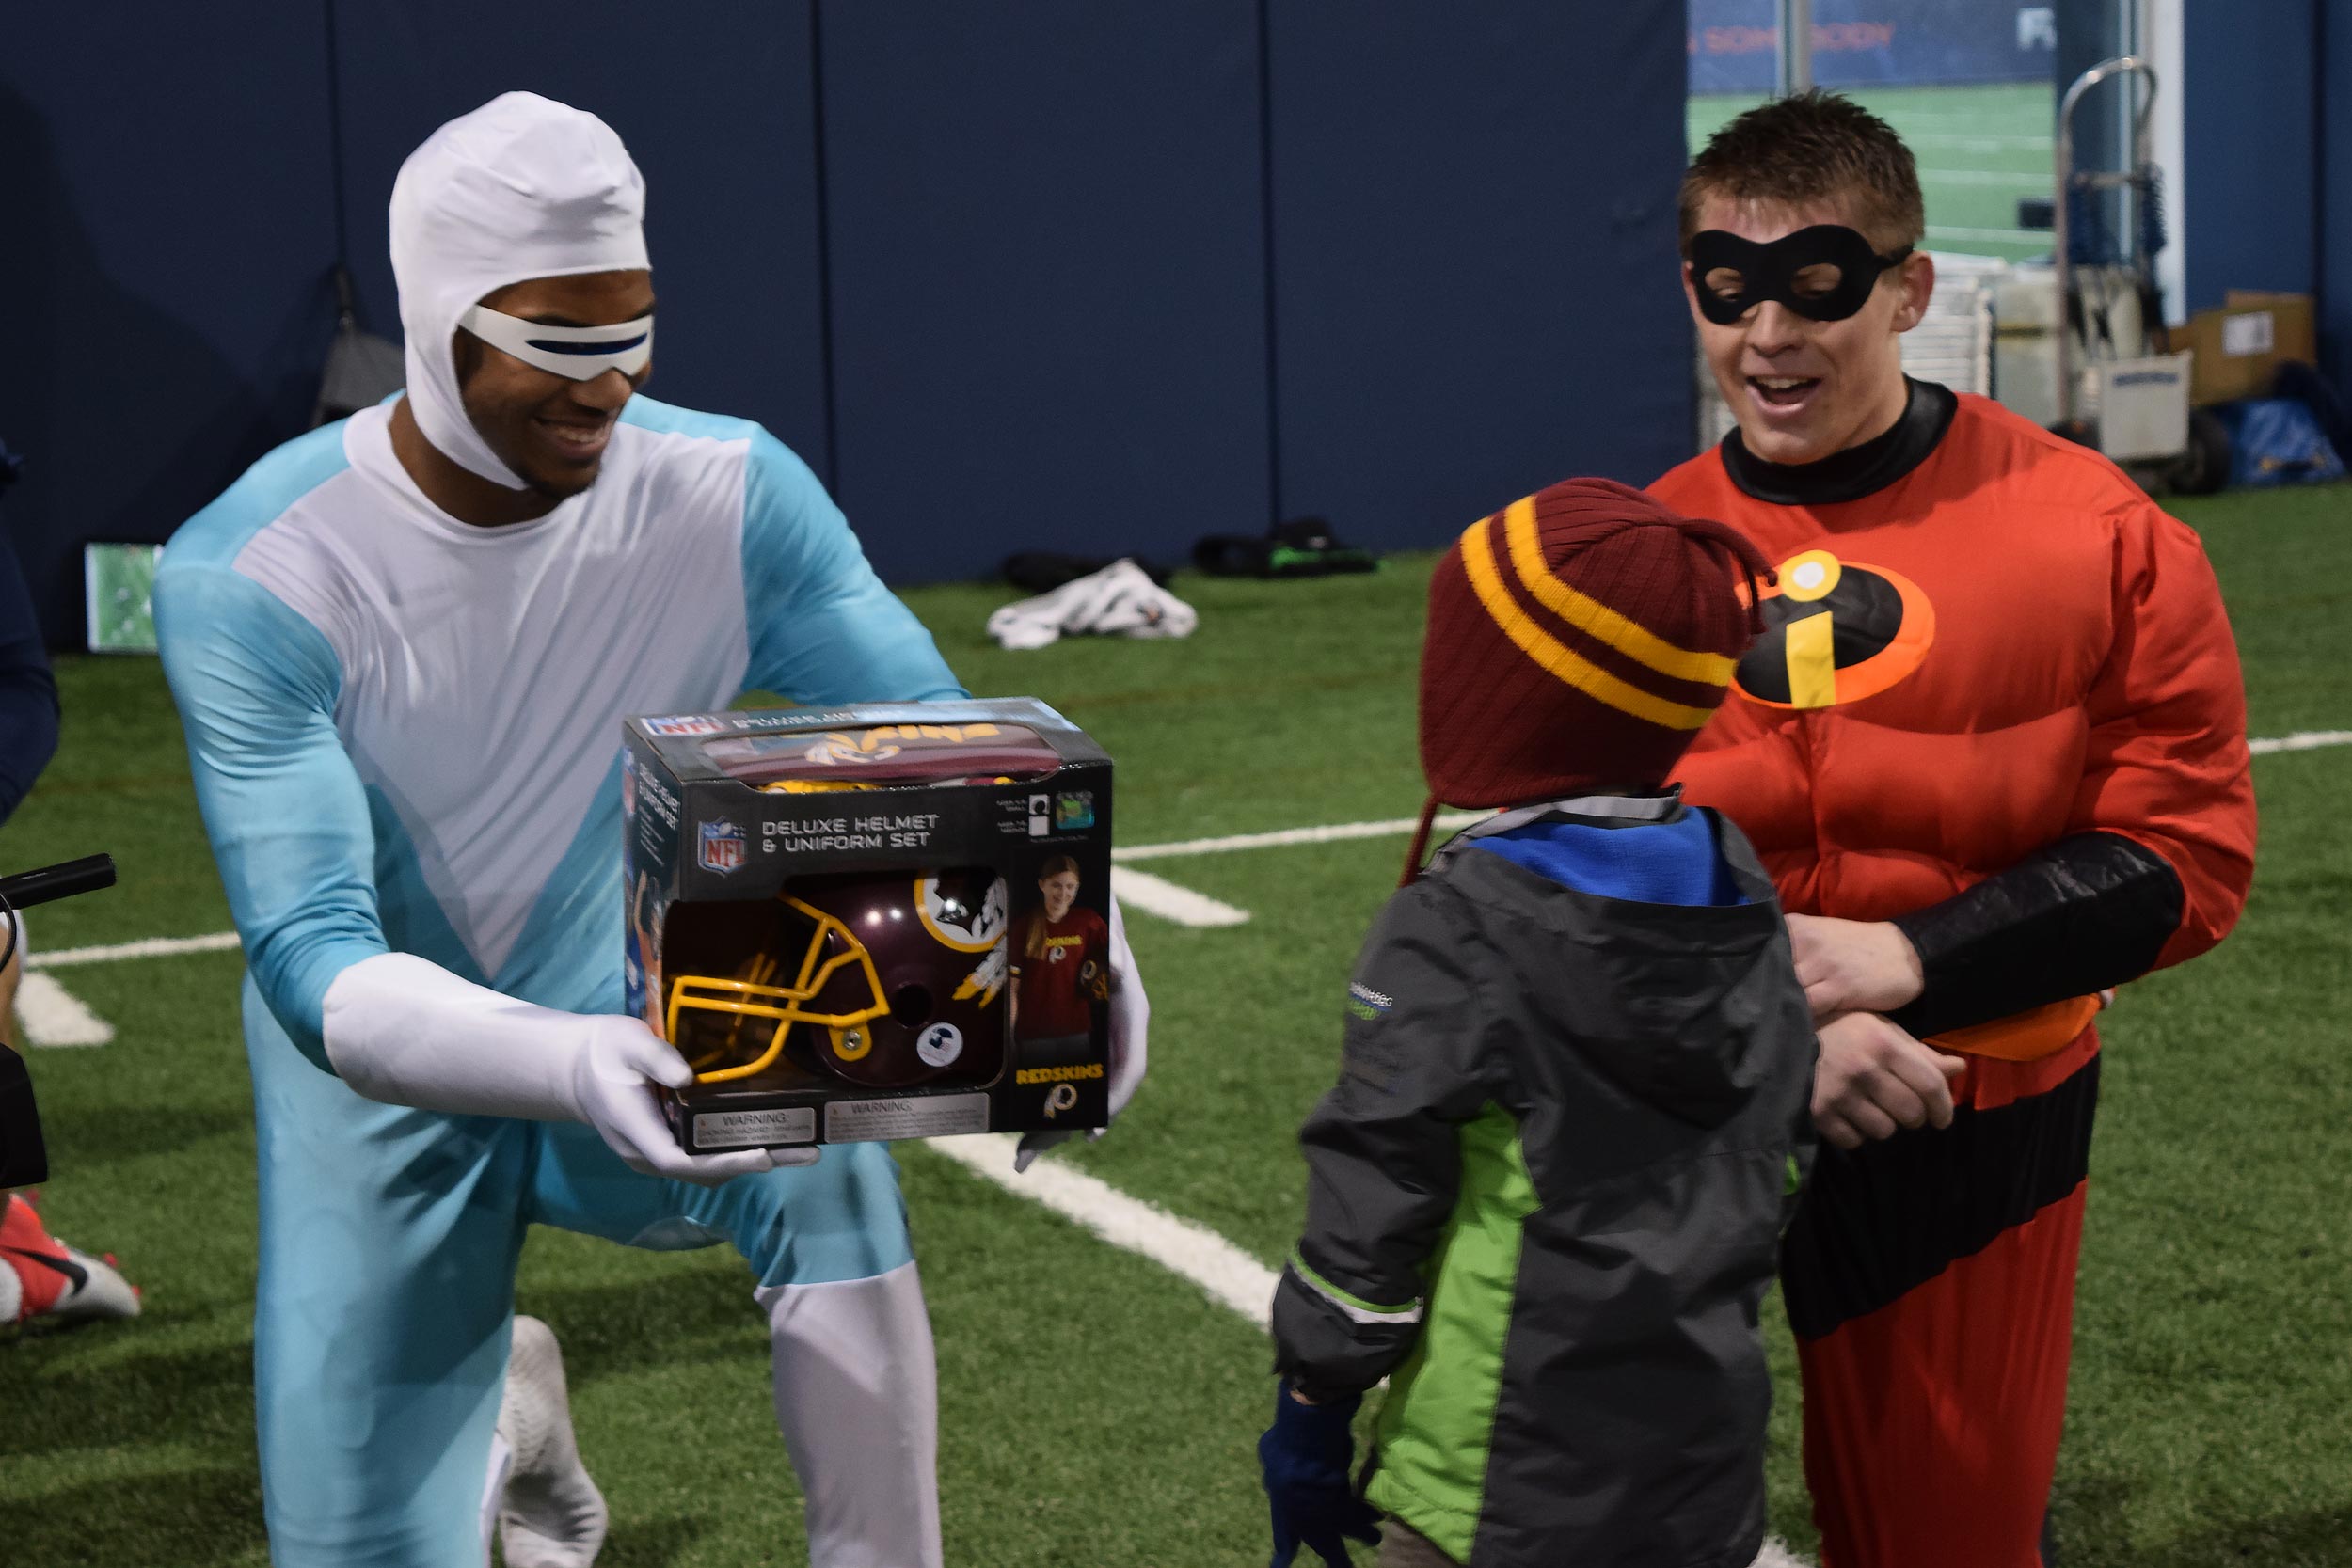 Snowden, left, dressed as Frozone from “The Incredibles” handing a football helmet to a child